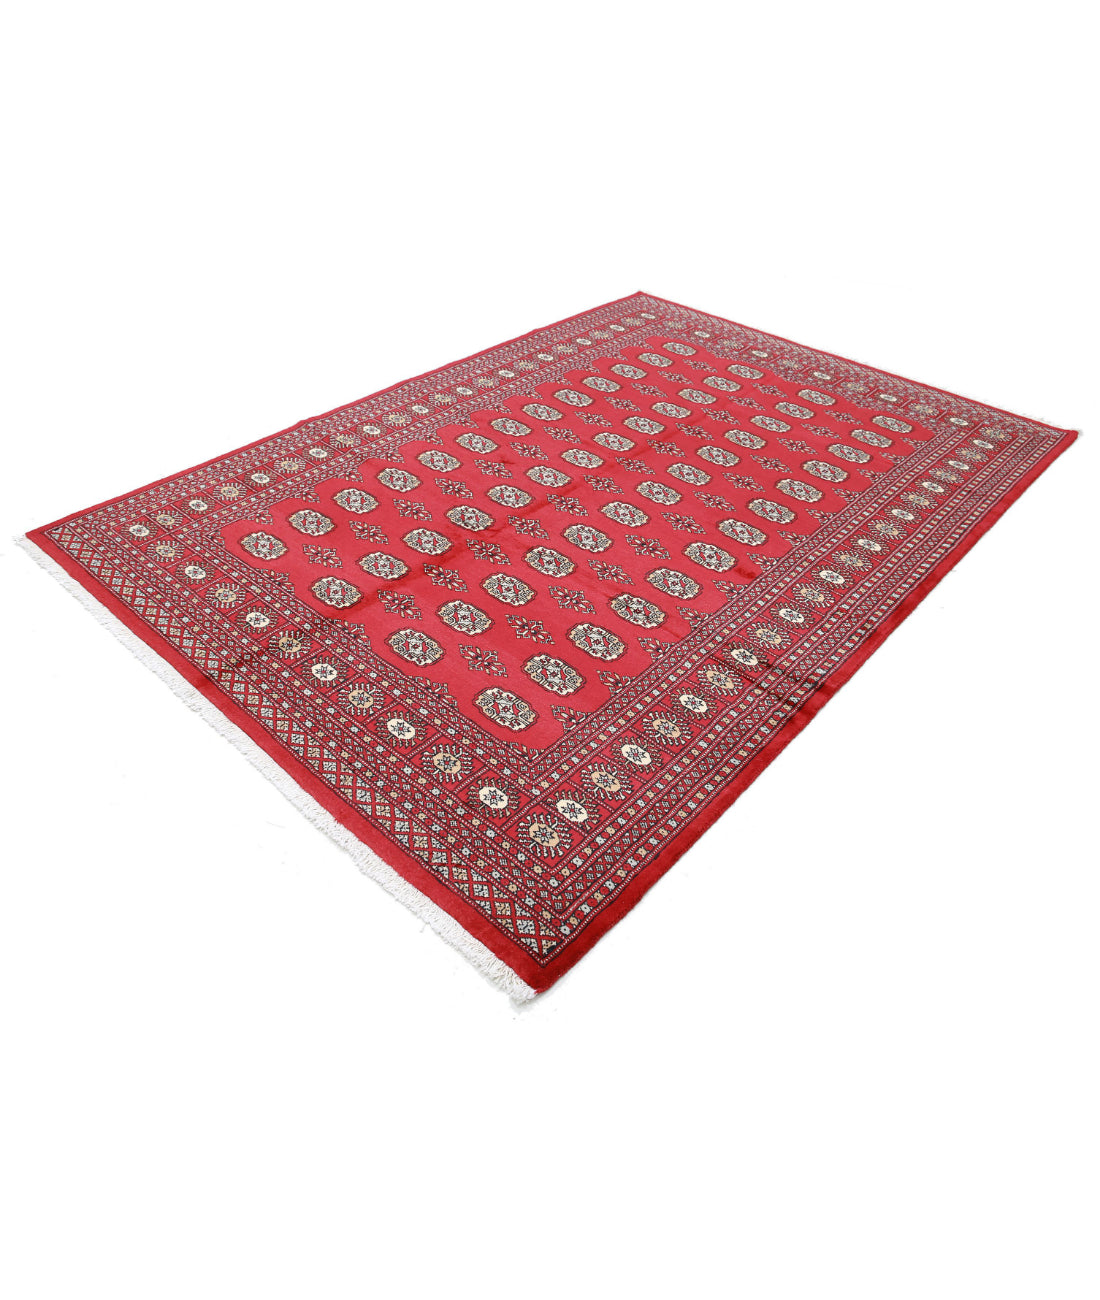 Hand Knotted Tribal Bokhara Wool Rug - 6'2'' x 8'9'' 6'2'' x 8'9'' (185 X 263) / Red / Black